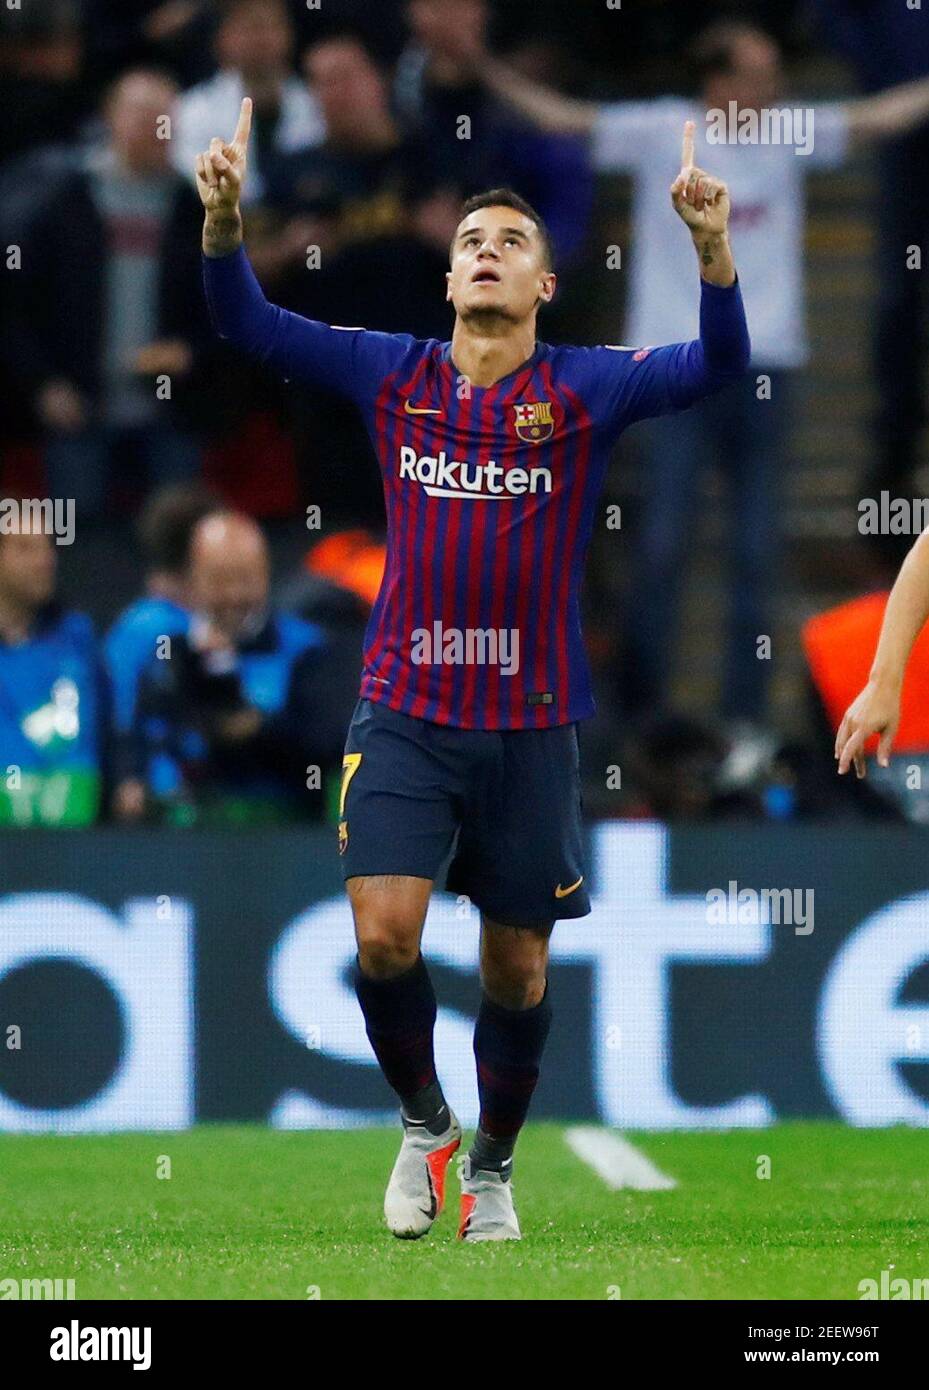 Soccer Football - Champions League - Group Stage - Group B - Tottenham Hotspur v FC Barcelona - Wembley Stadium, London, Britain - October 3, 2018  Barcelona's Philippe Coutinho celebrates scoring their first goal   REUTERS/Eddie Keogh Stock Photo